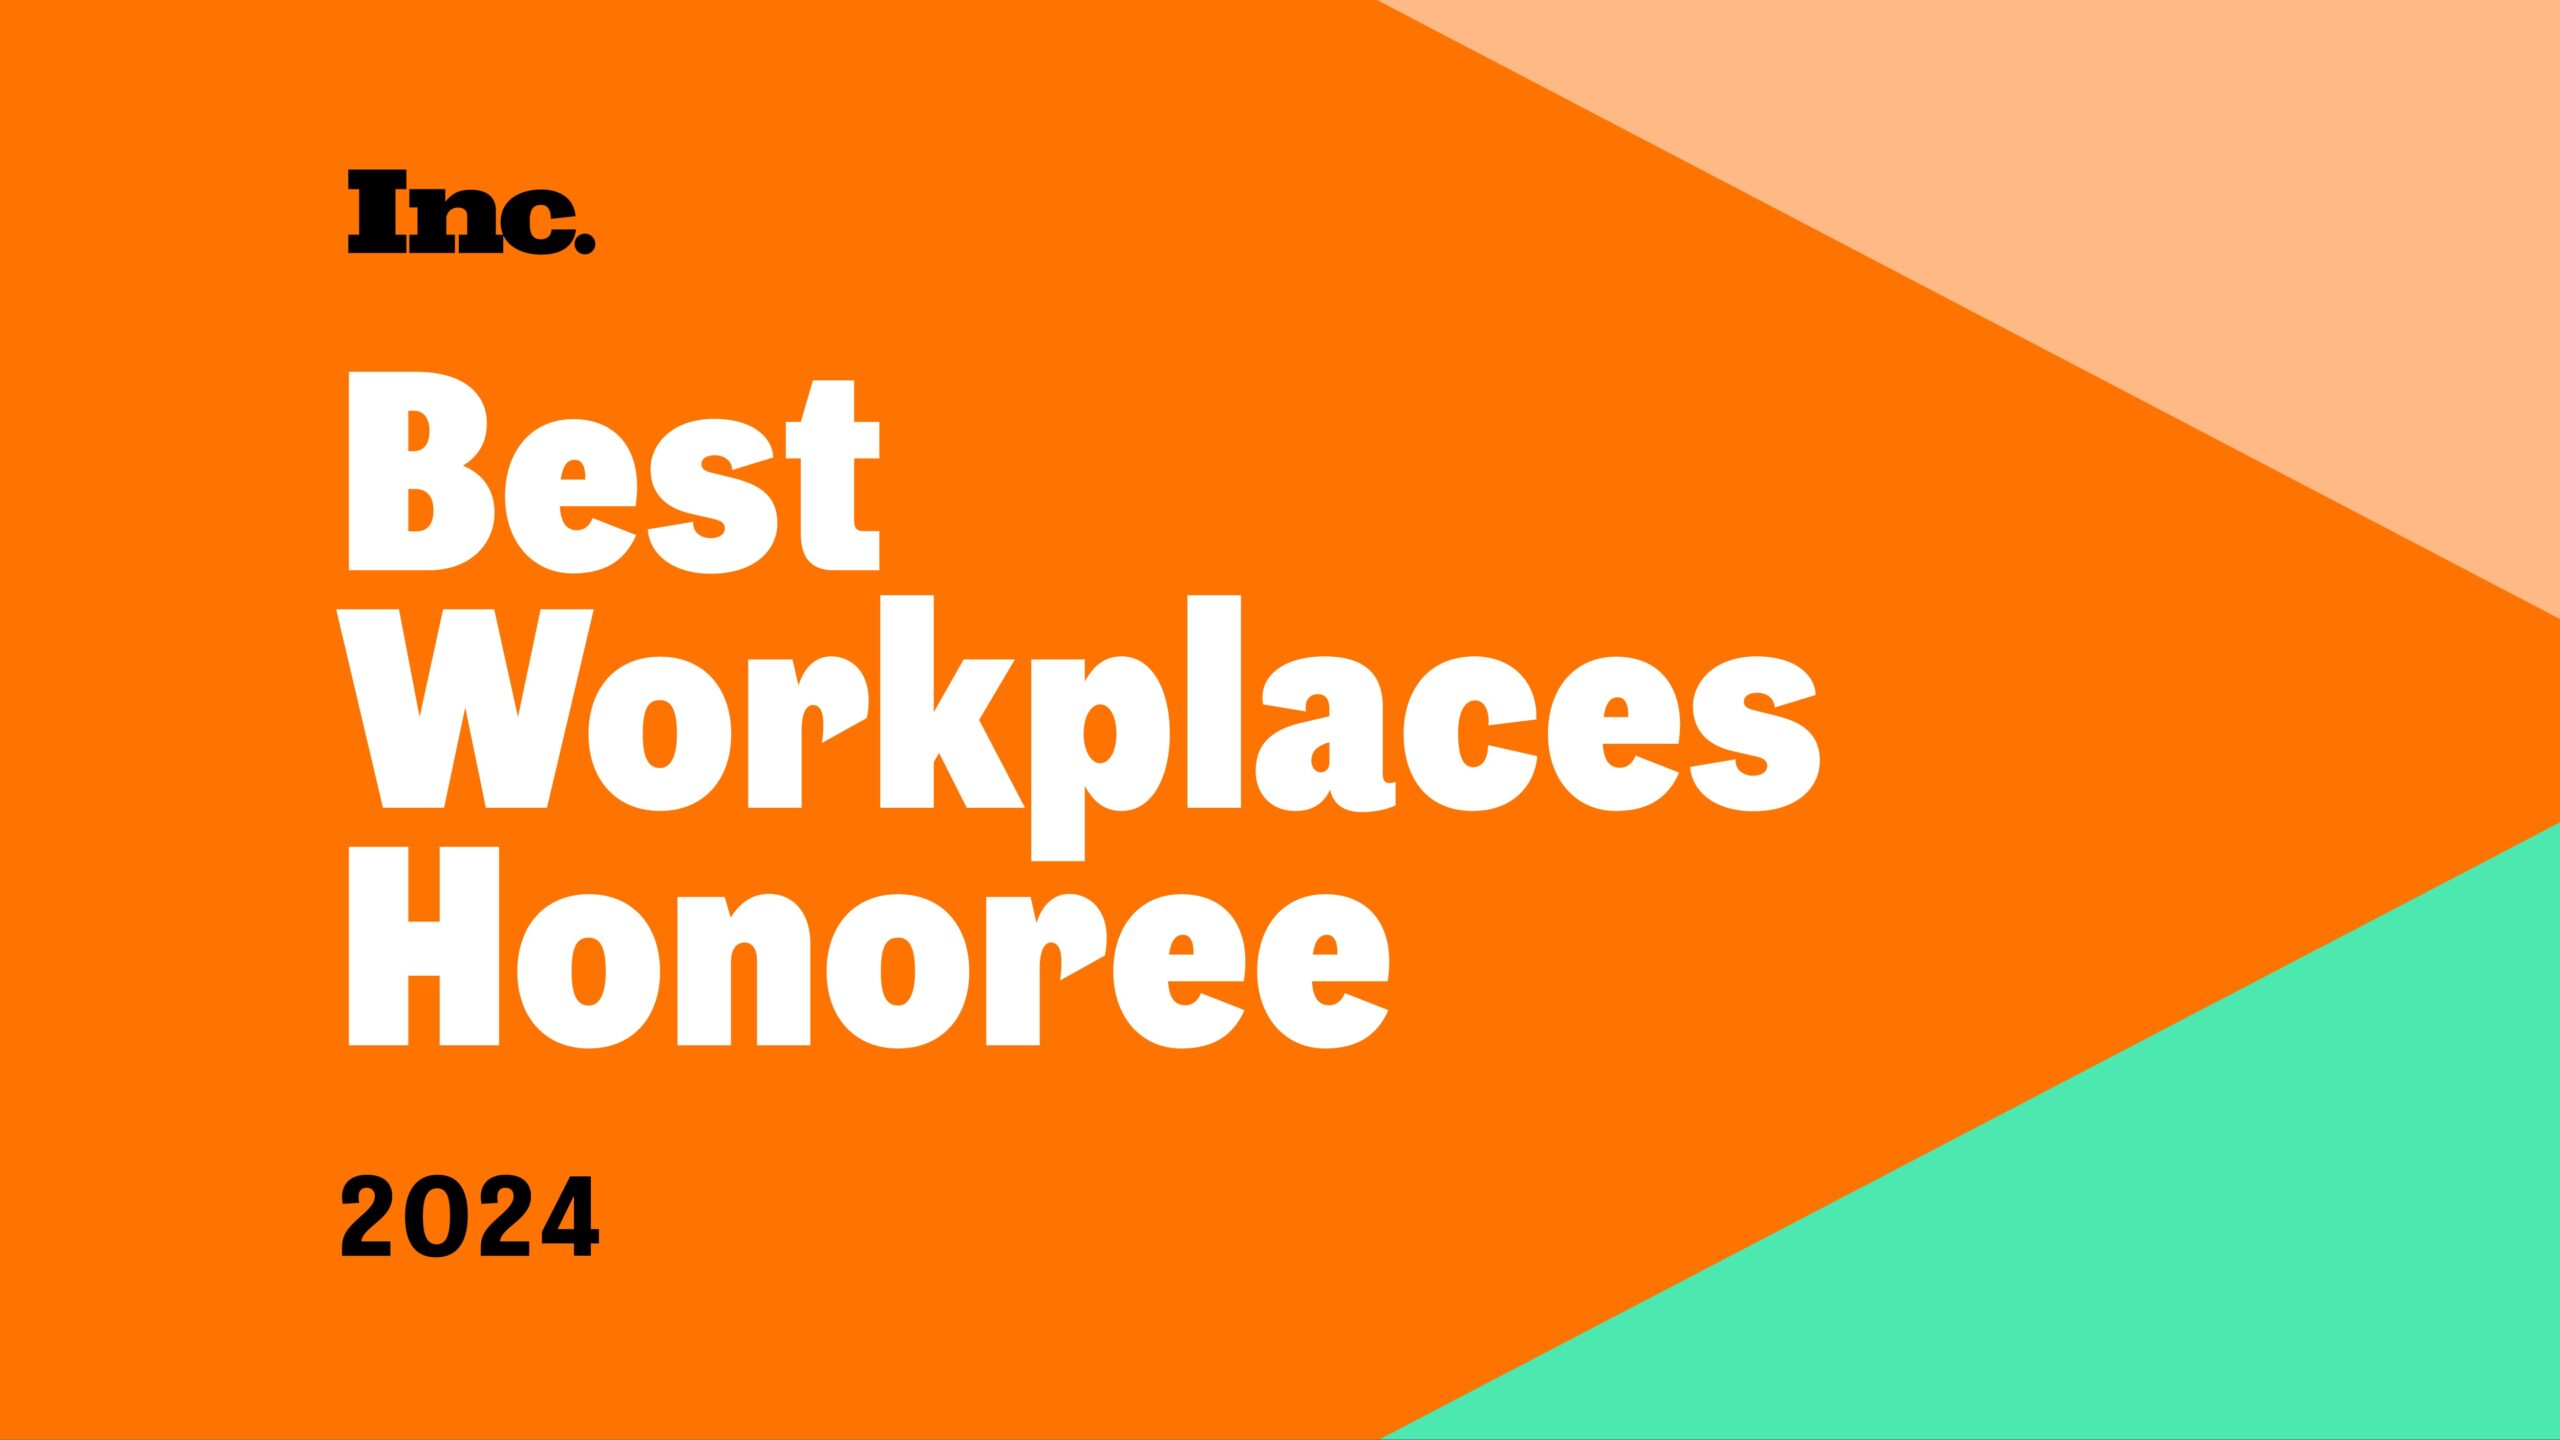 Inc. 5000 best workplaces honoree branded graphic for 2024